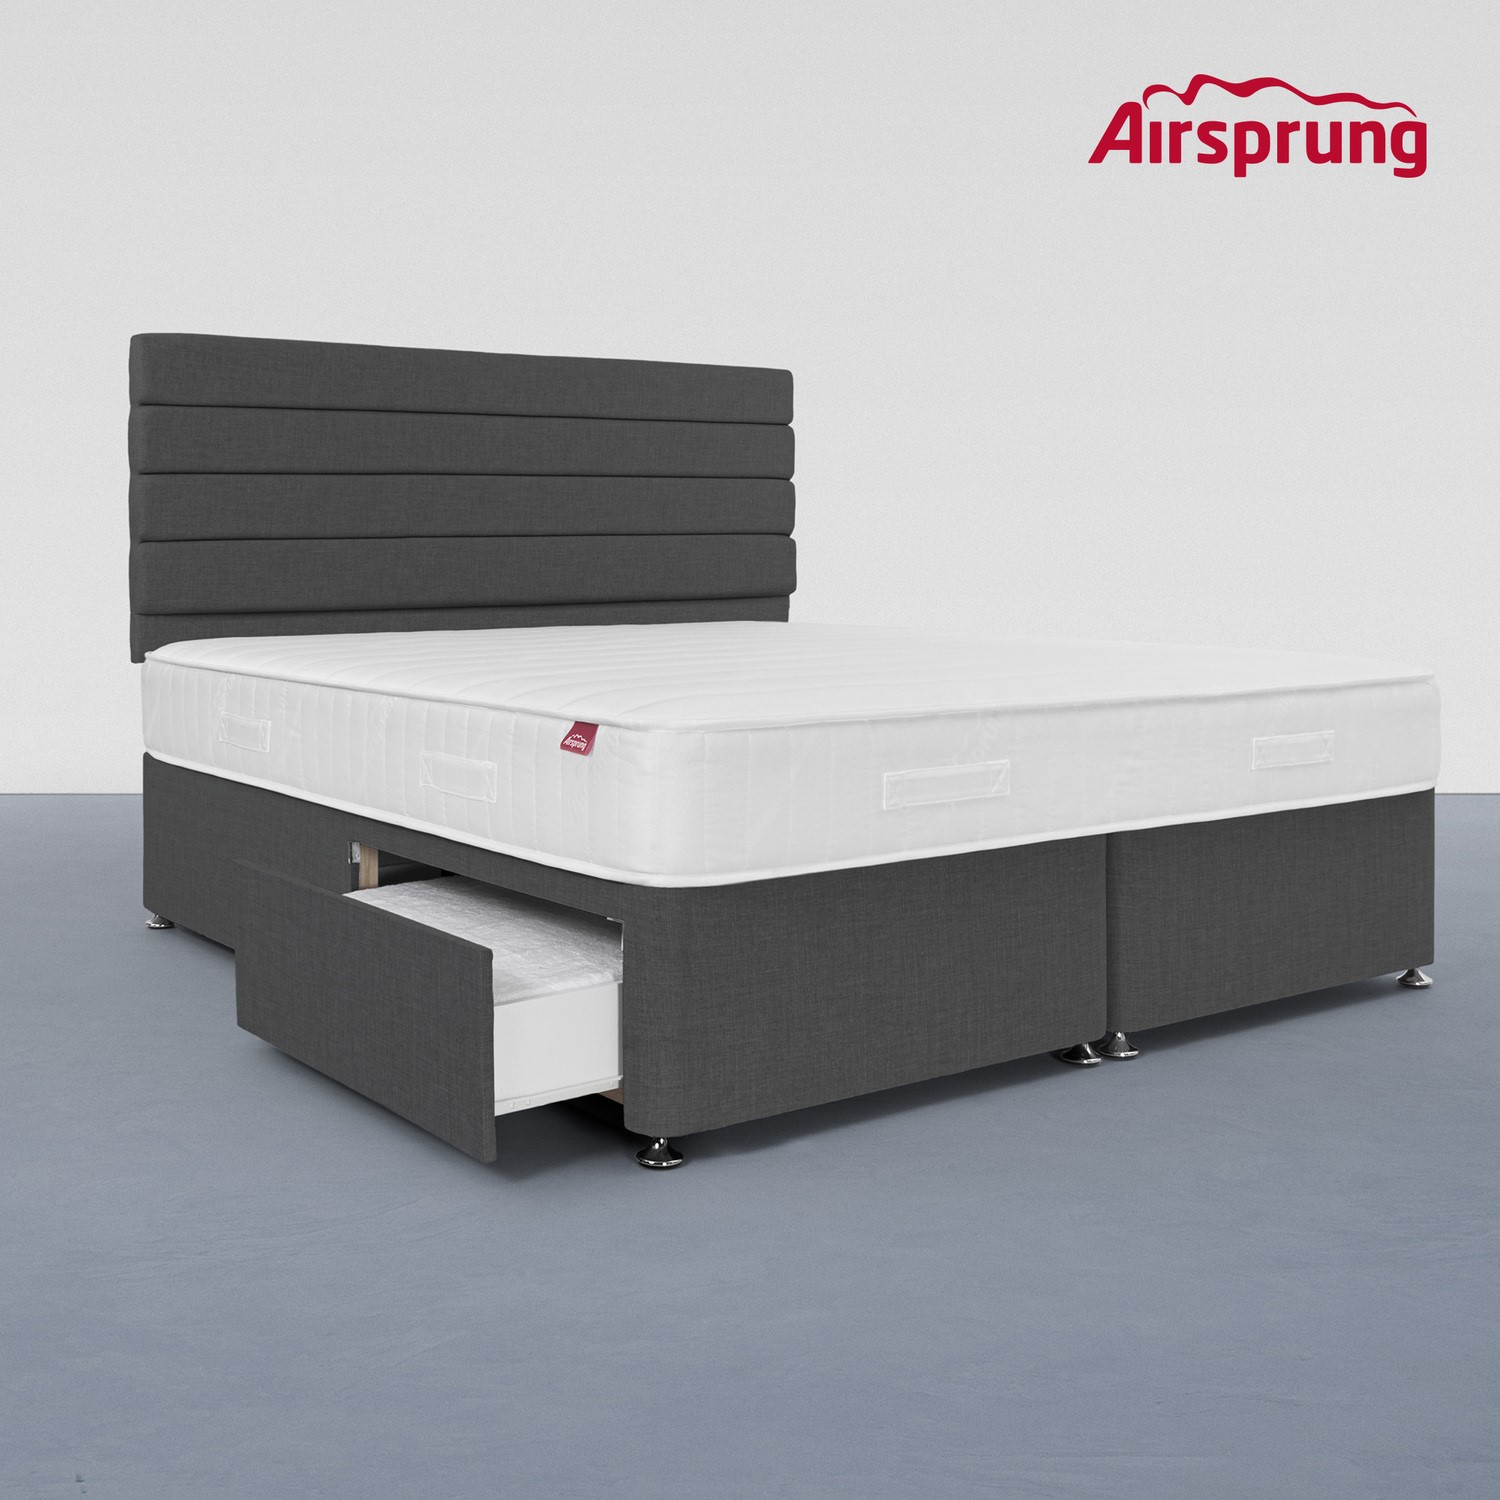 Read more about Airsprung super king 2 drawer divan bed with hybrid mattress charcoal